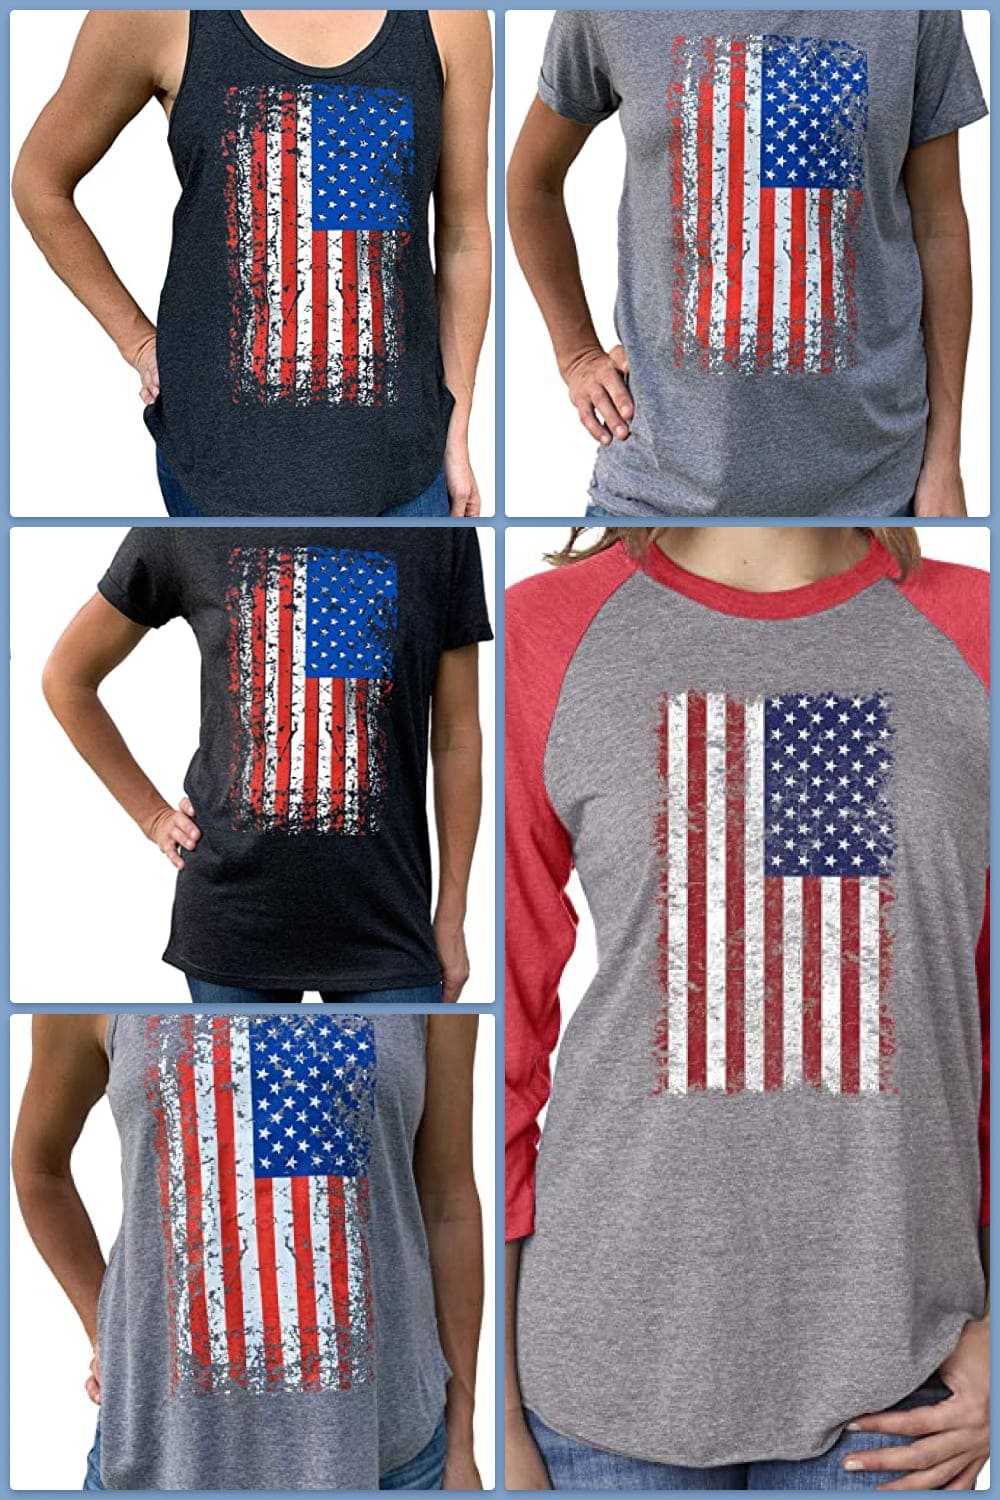 Collage of t-shirts and t-shirts with the American flag.